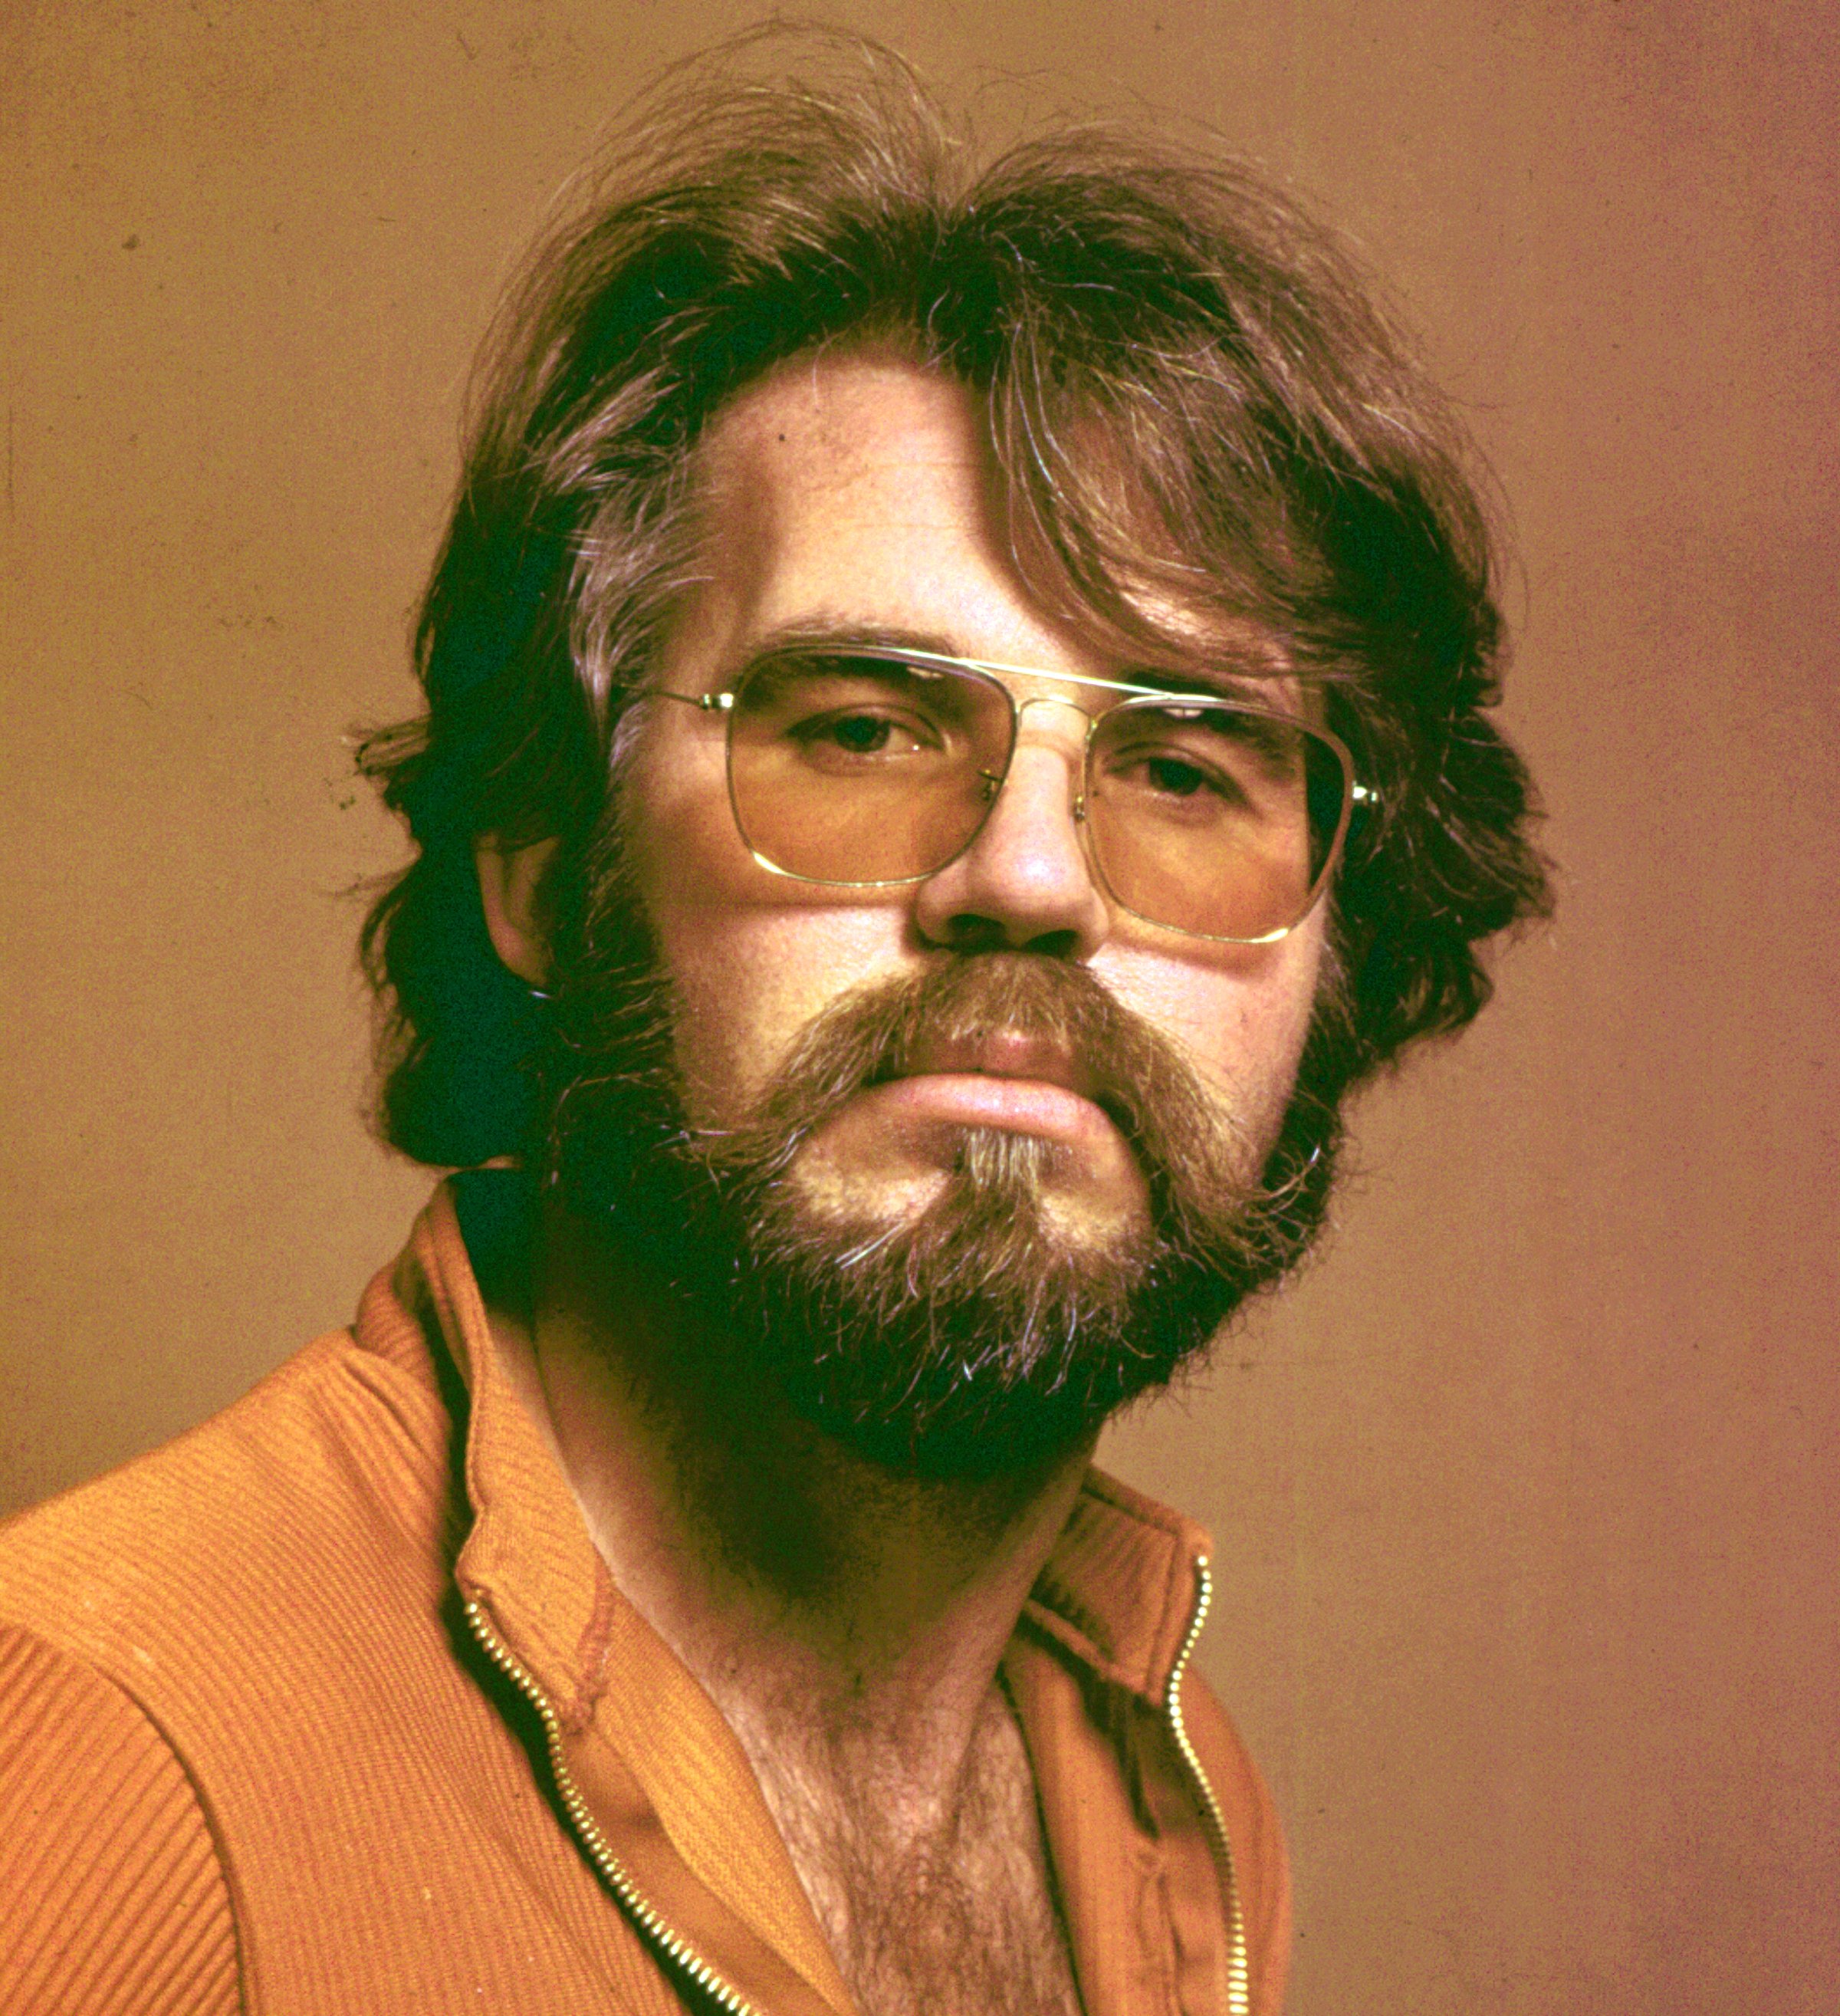 Pictured: An up-close of songwriter and record producer, Kenny Rogers. / Source: Getty Images 